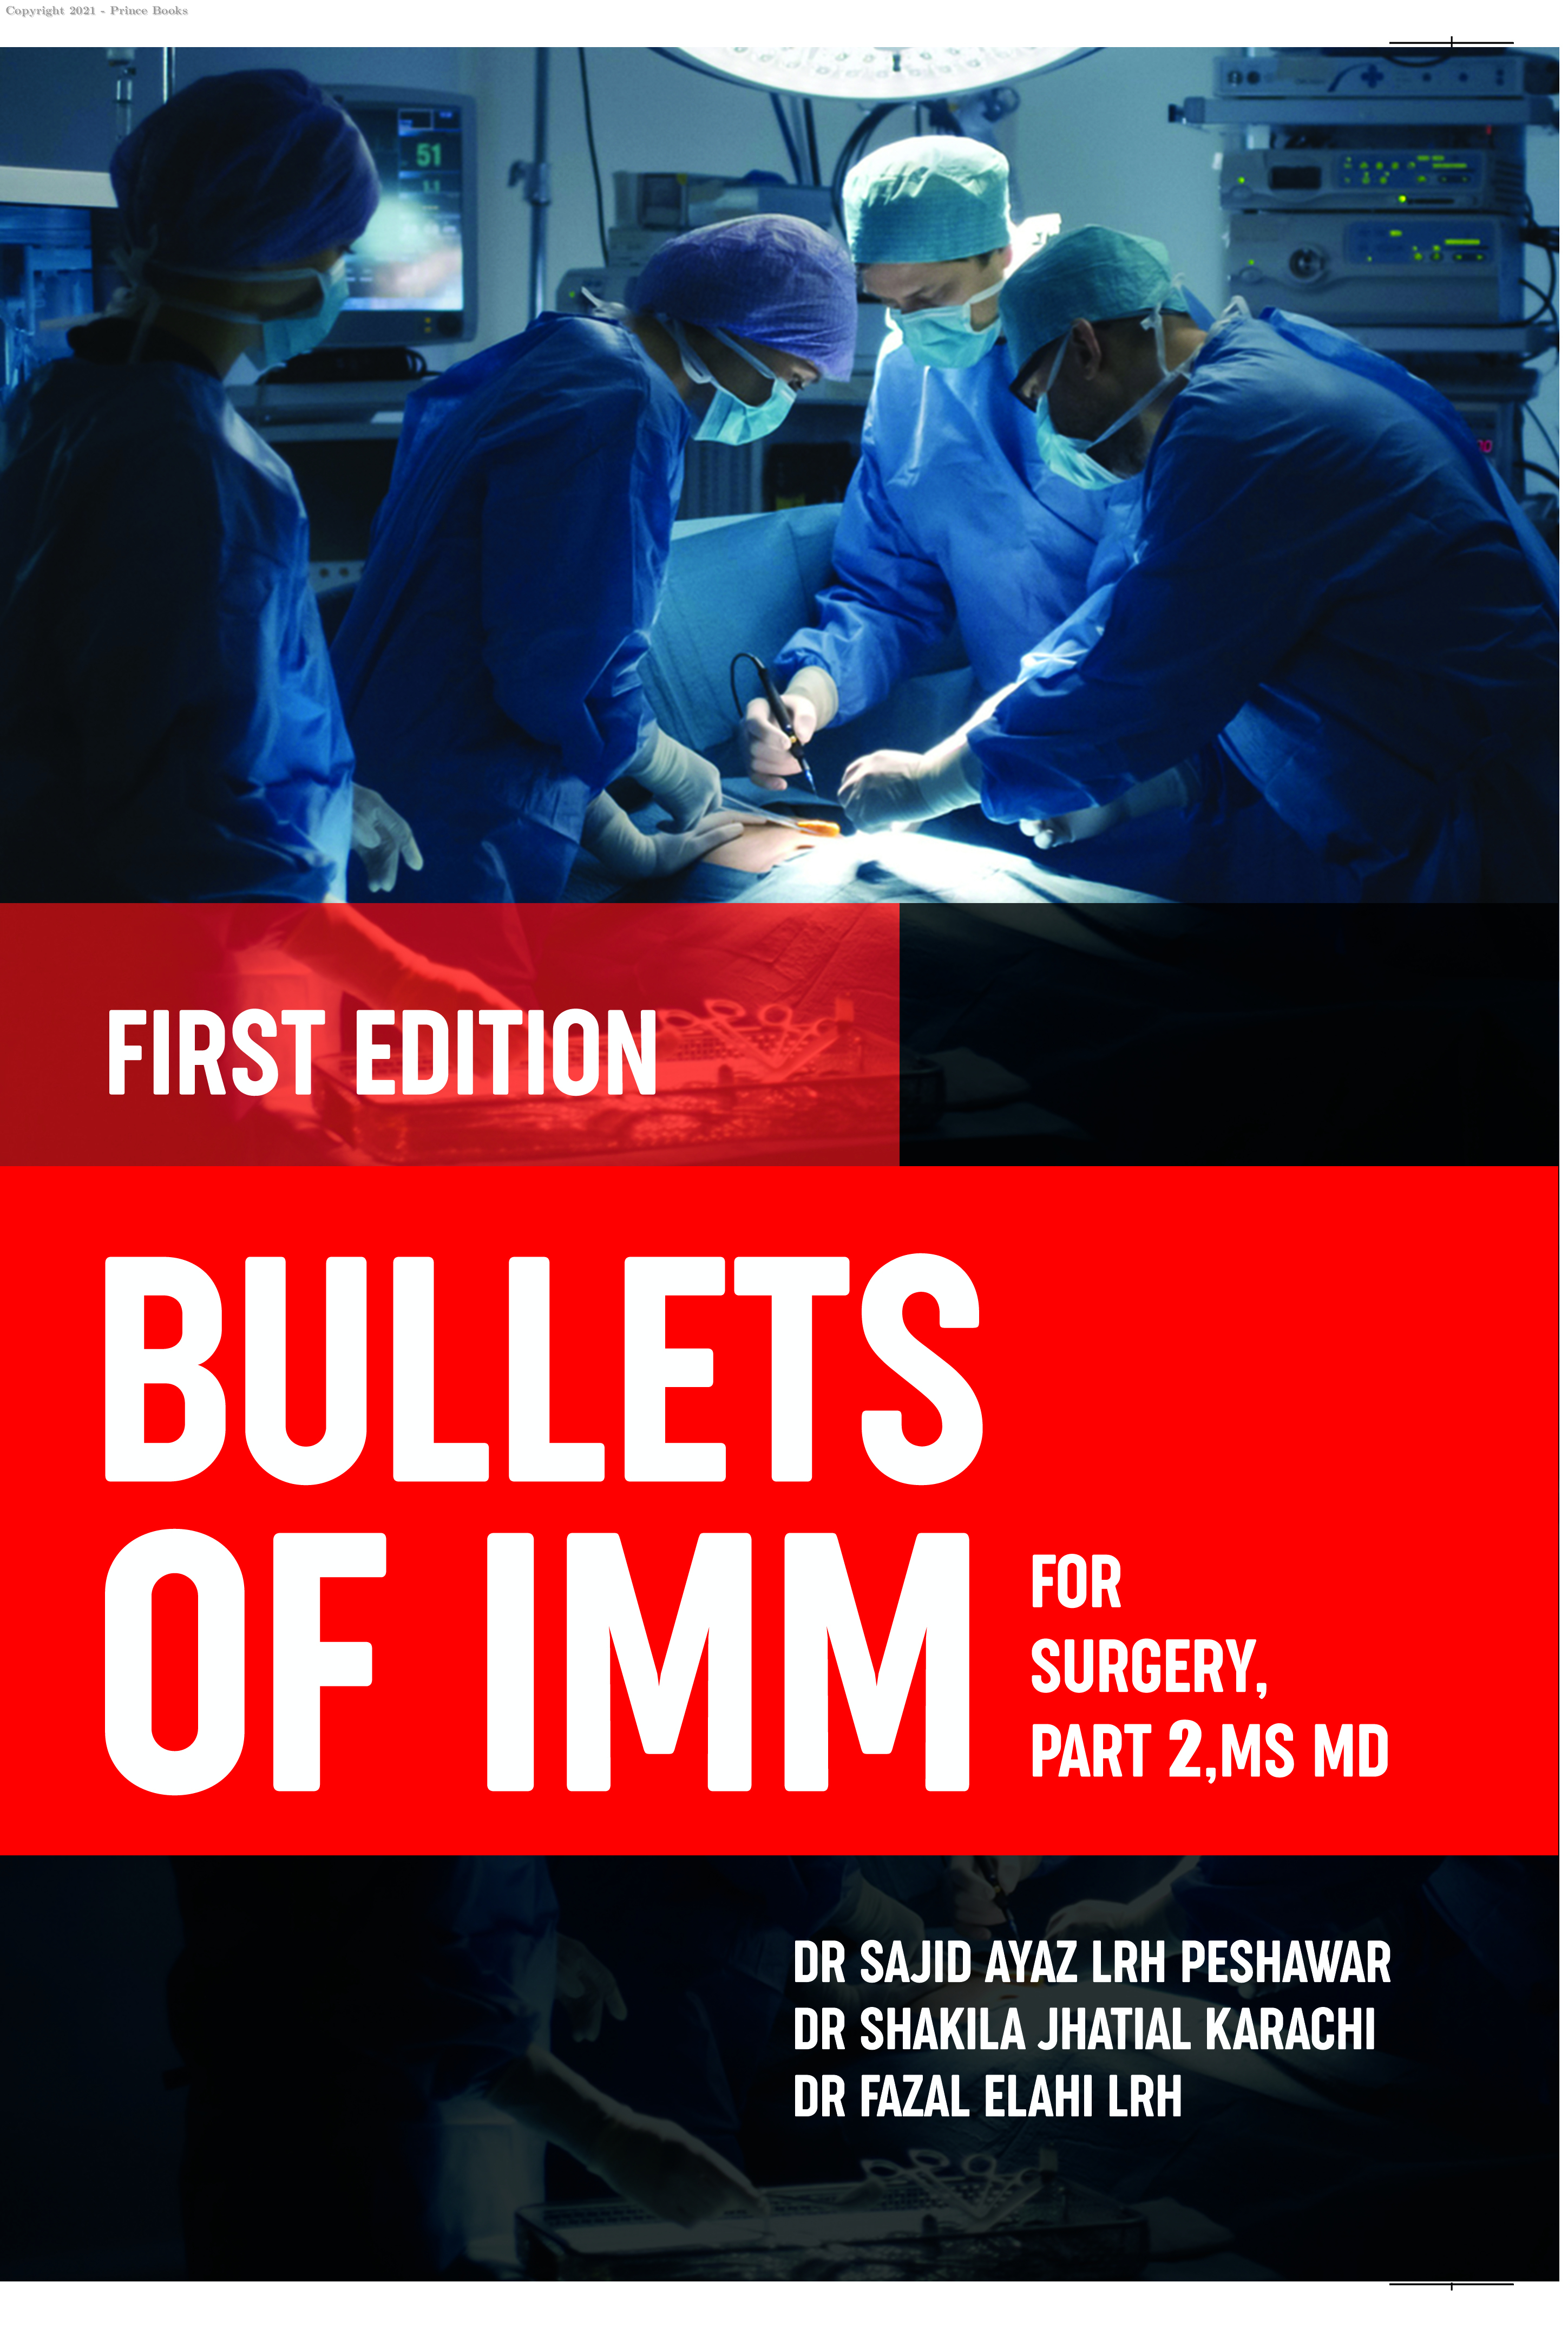 BULLETS OF IMM FOR SURGERY PART 2, MD MD